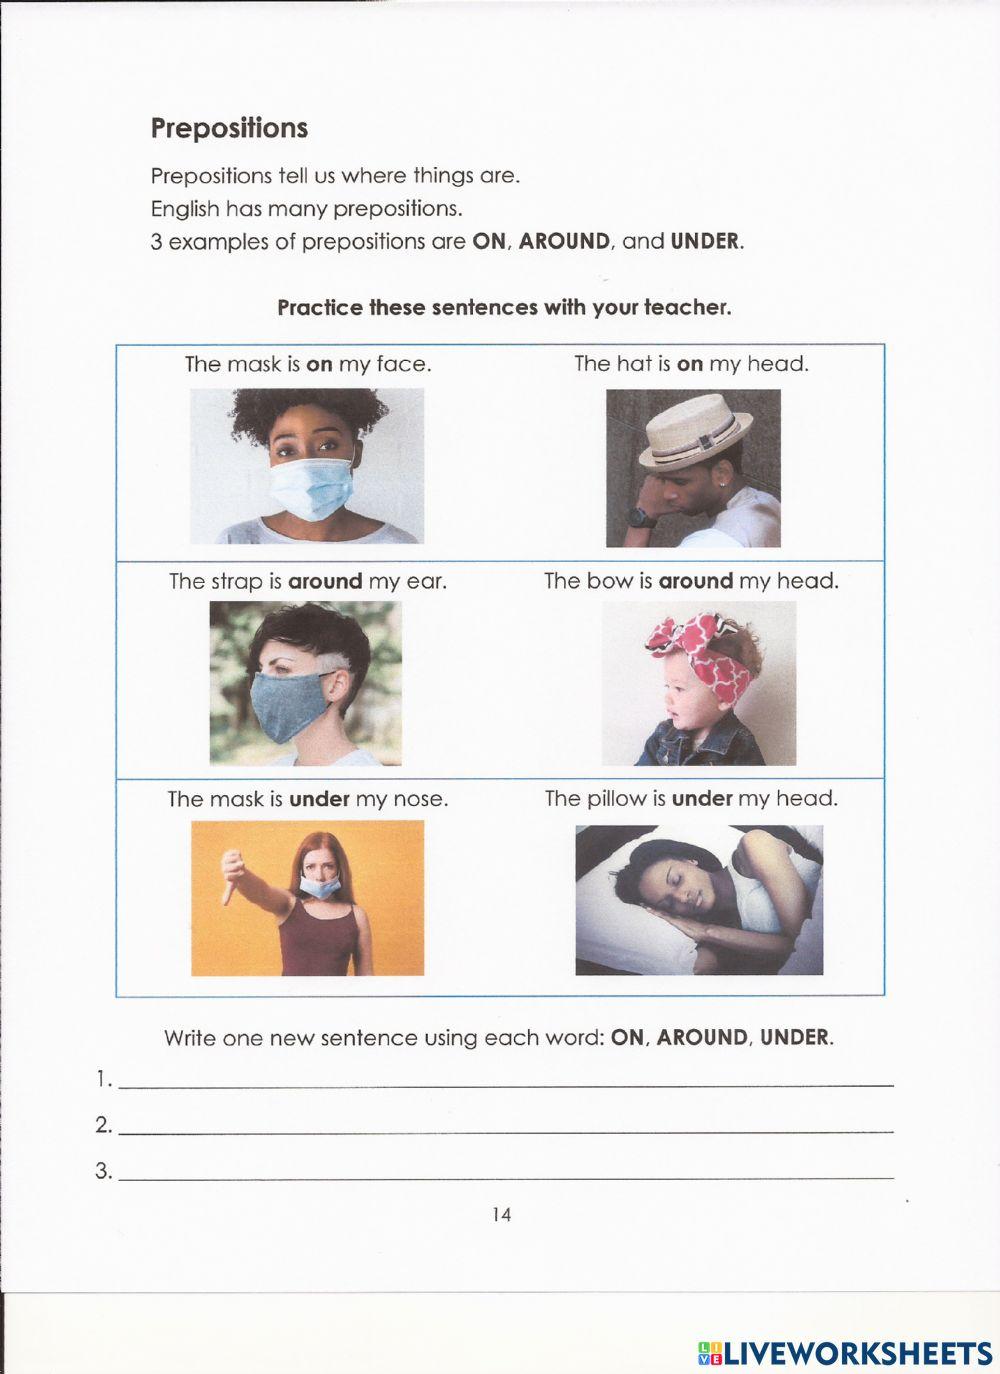 Prepositions and Face Masks